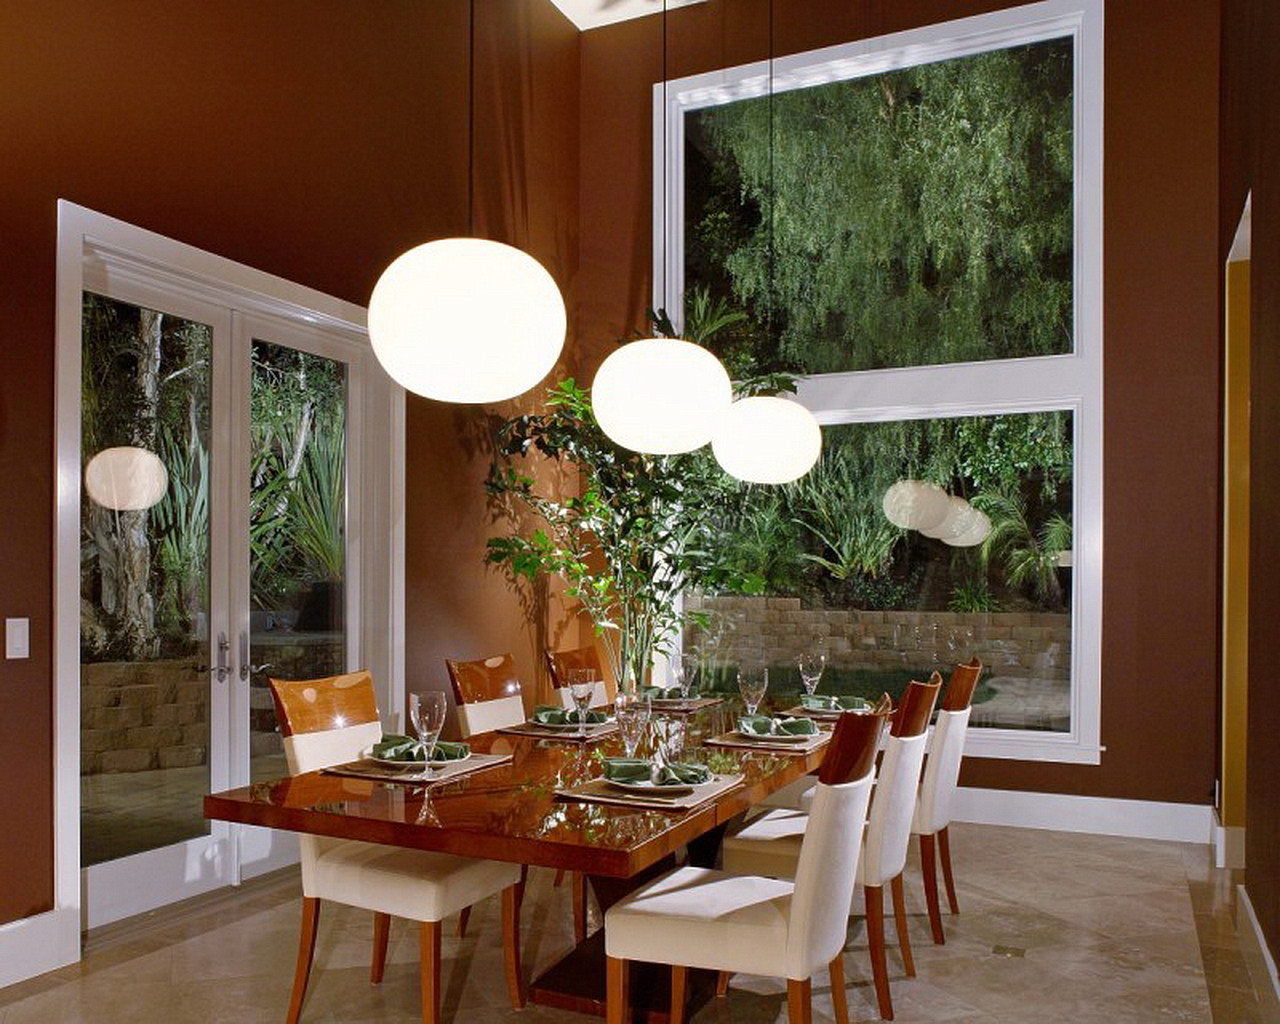 decorating ideas for dining room table